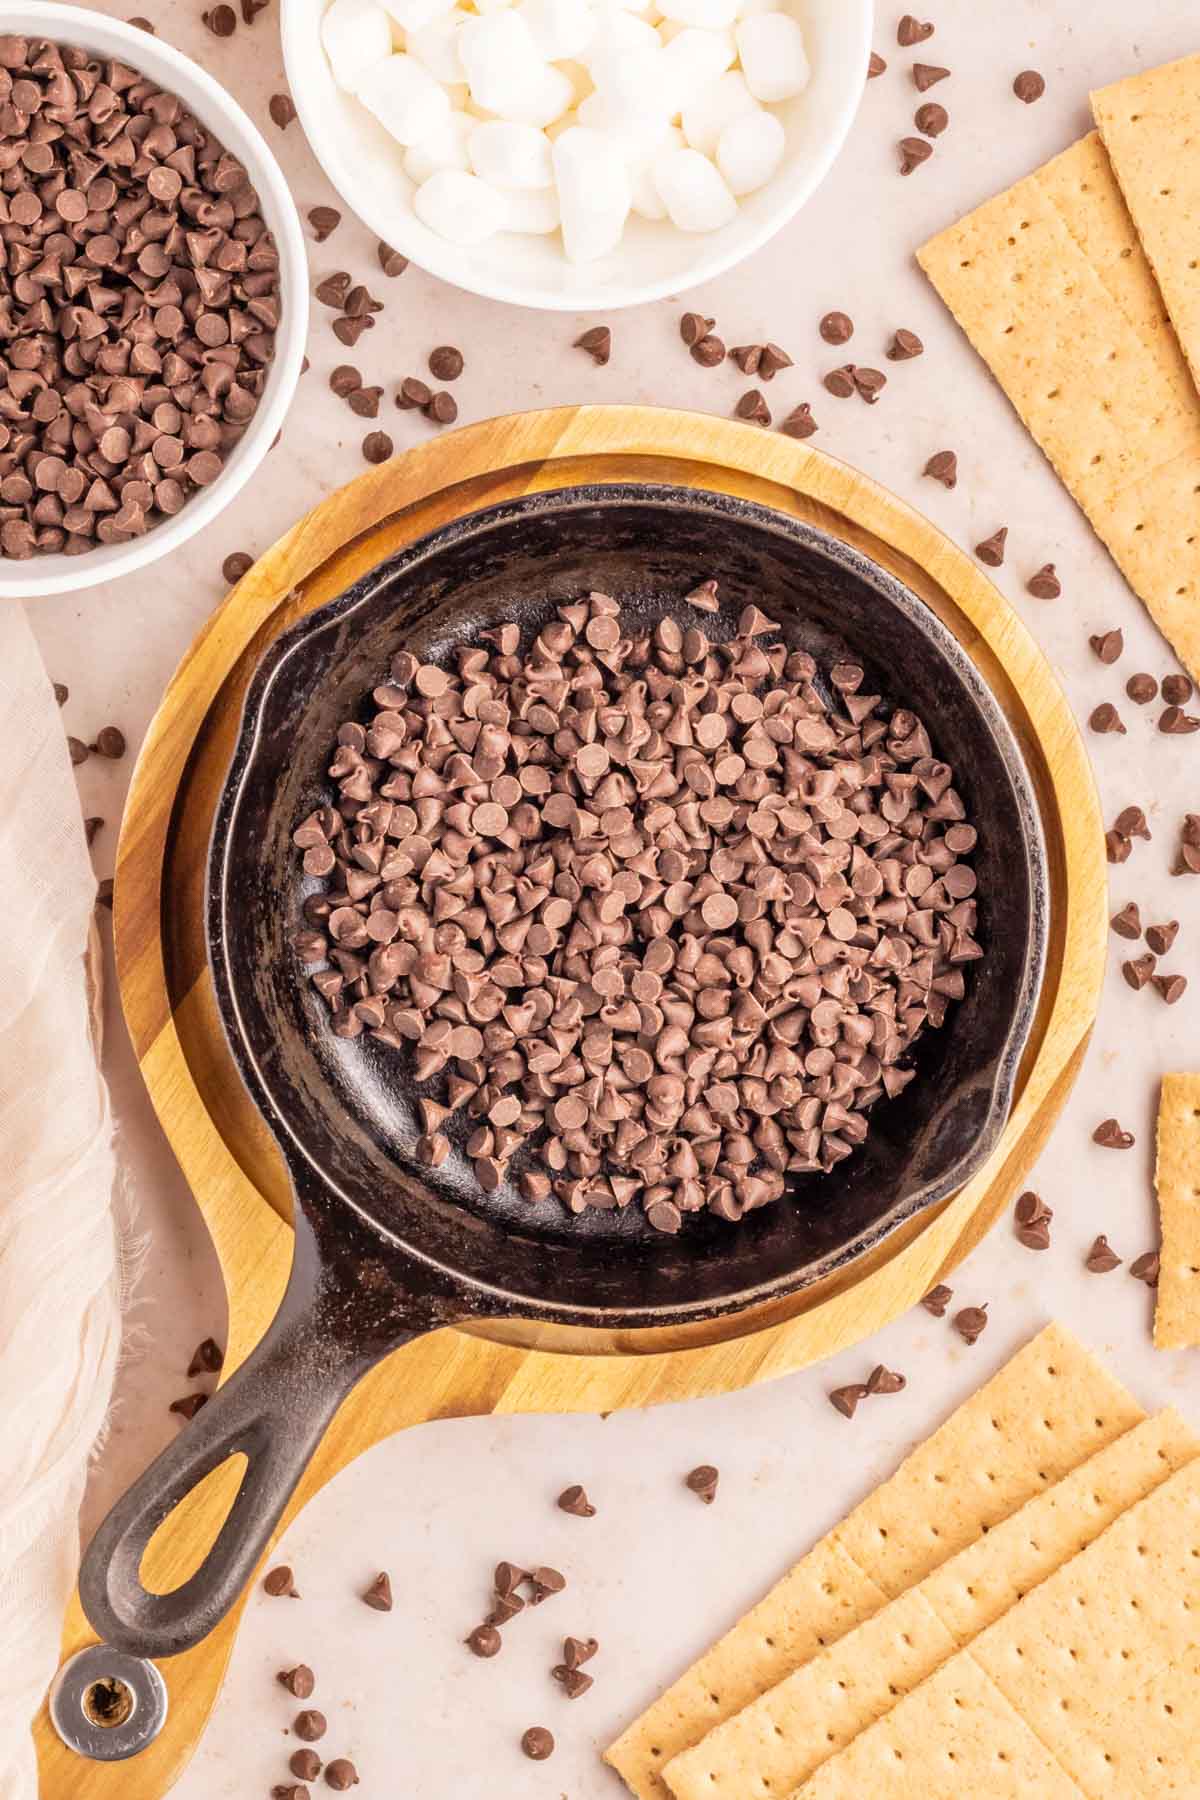 Chocolate chips added to a cast iron skillet.